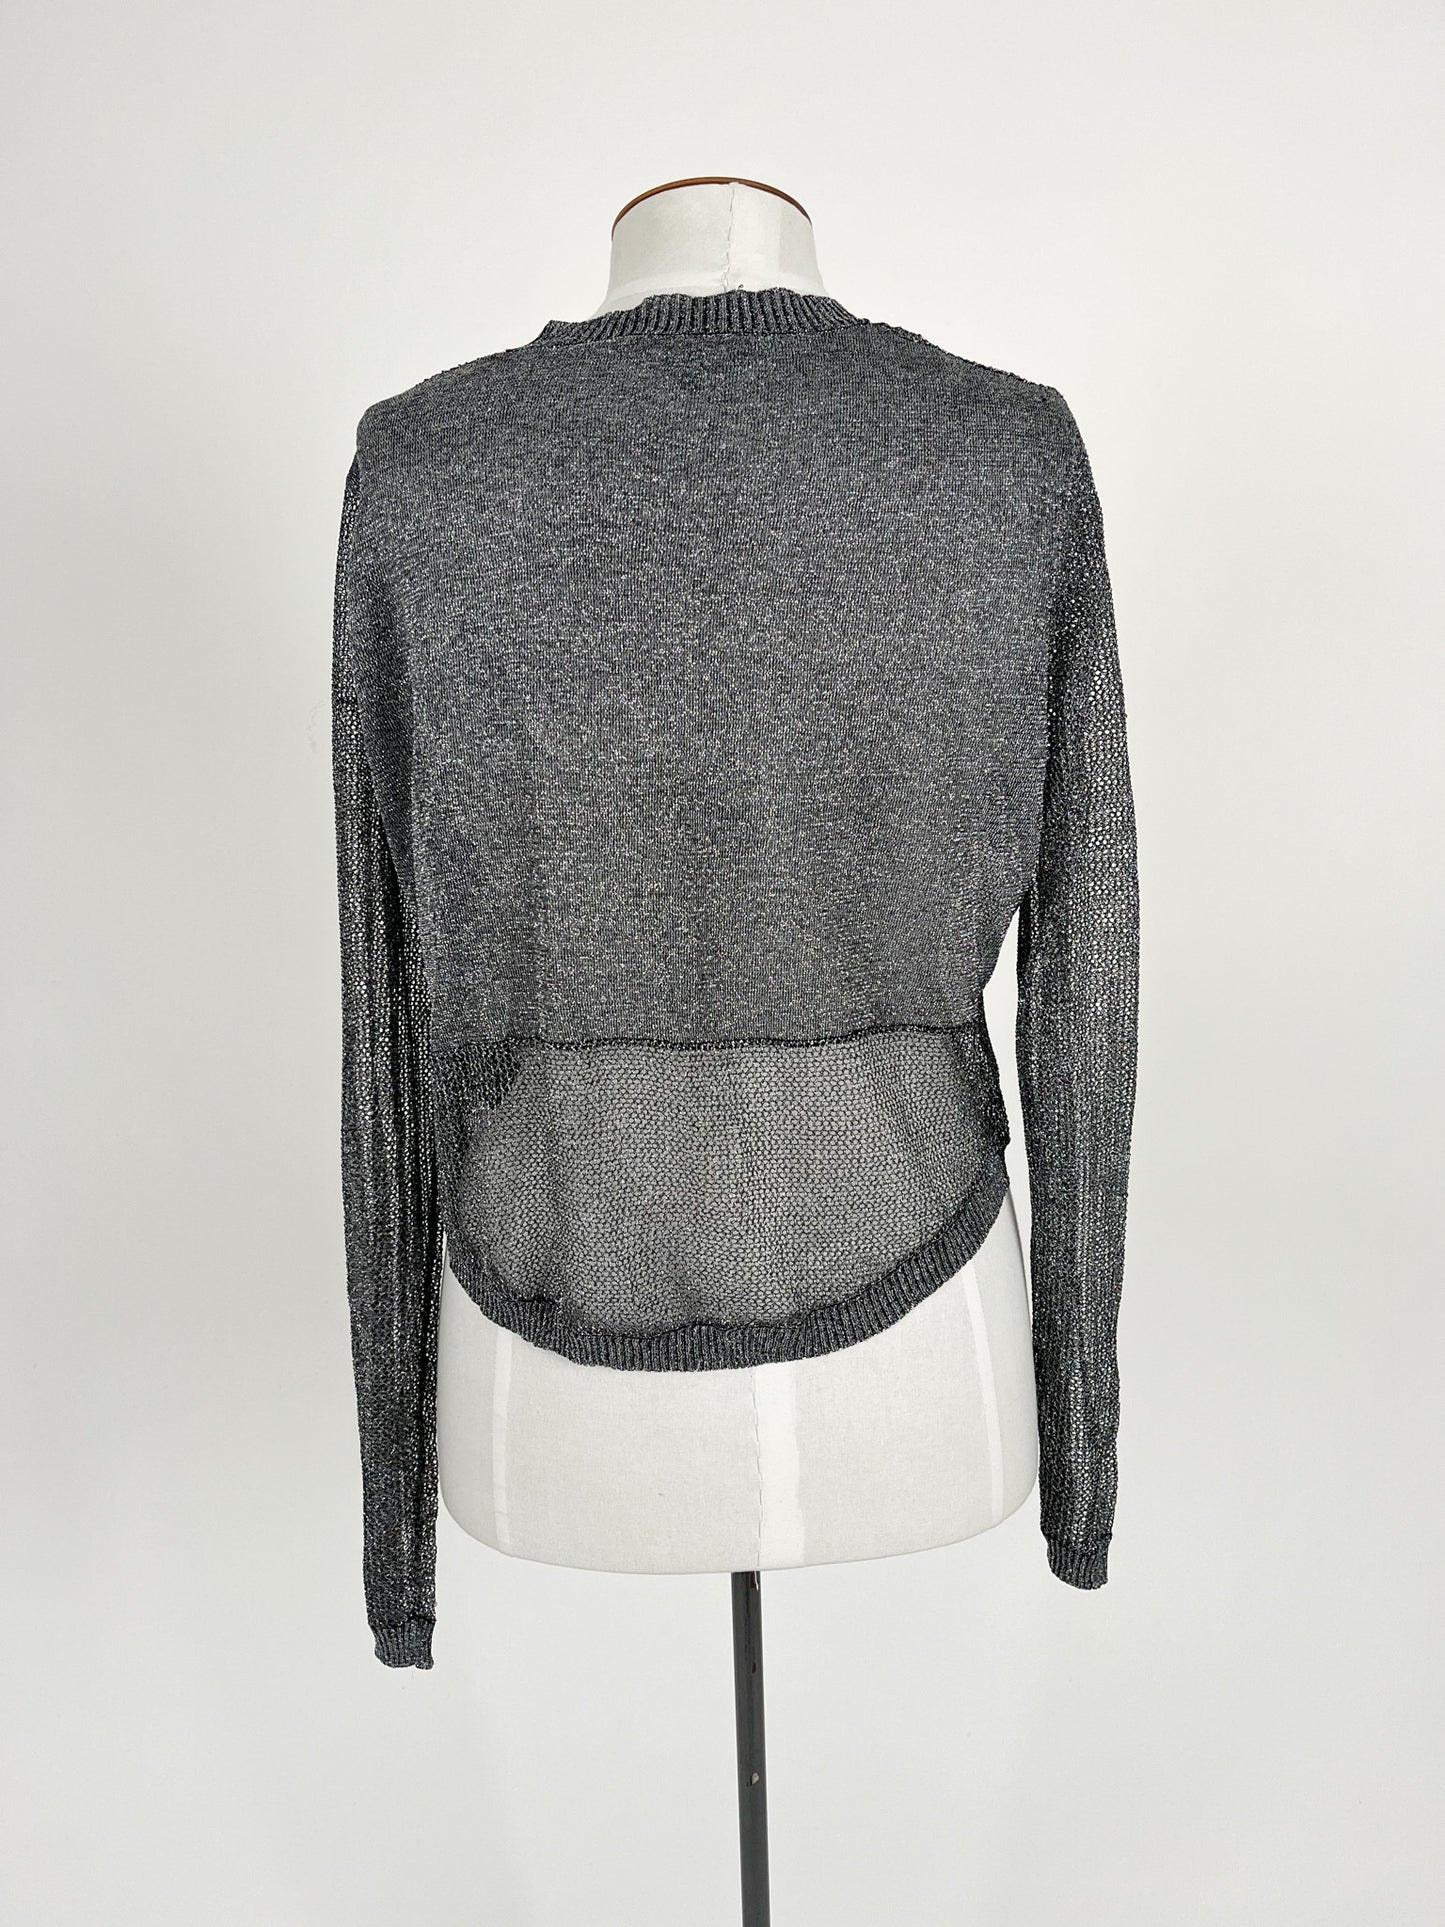 Max | Grey Casual/Cocktail Cardigan | Size XL